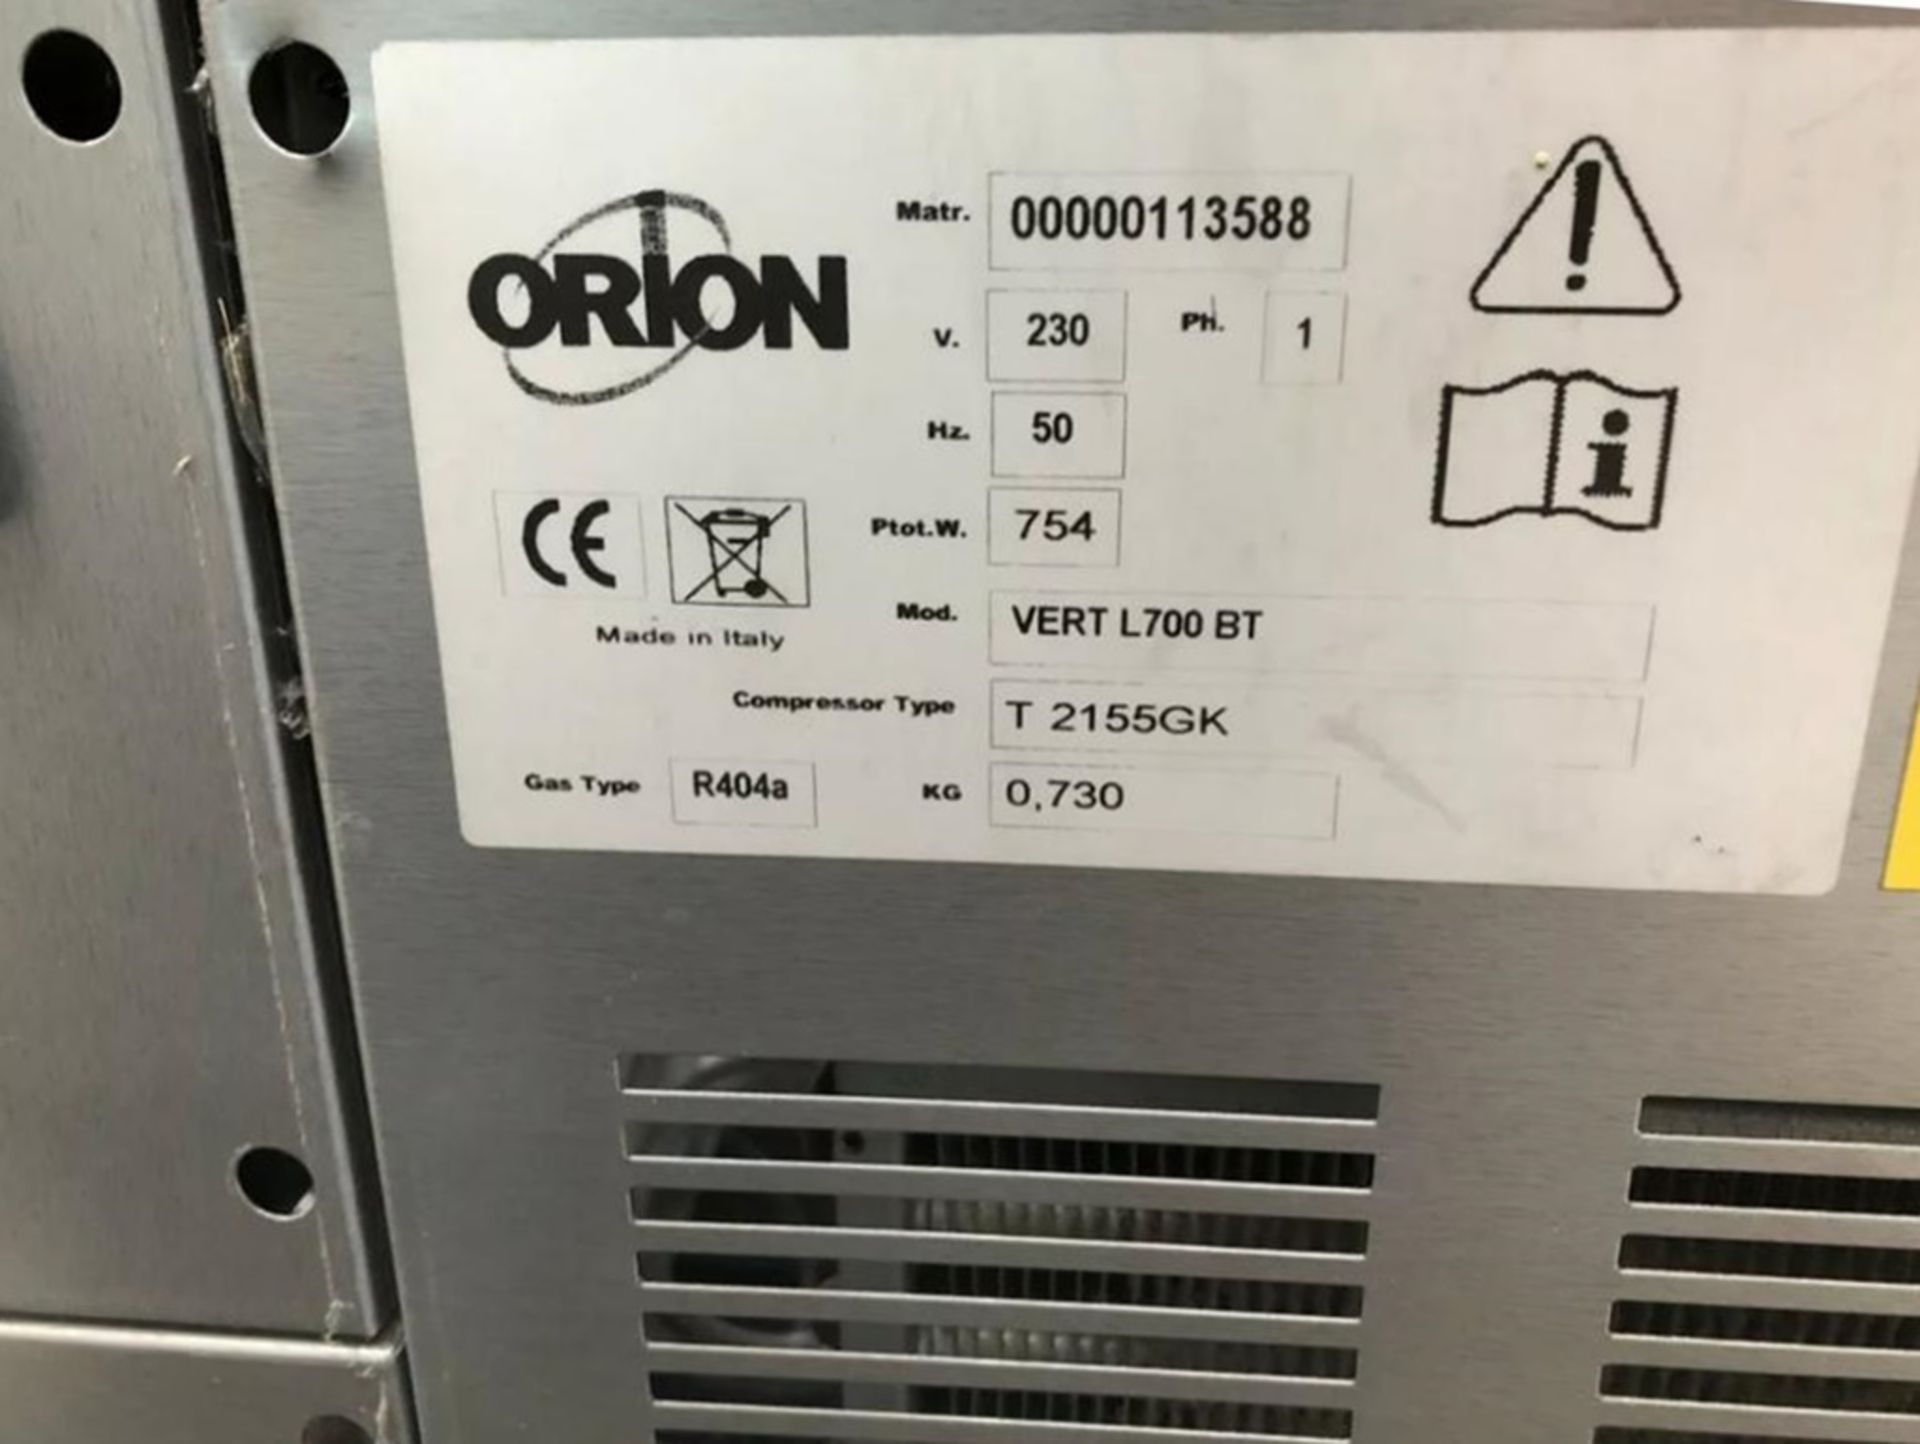 1 x Orion Refrigerated Display Chiller - Model VERT L700 BT  - CL667 - Location: Brighton, Sussex, - Image 2 of 4